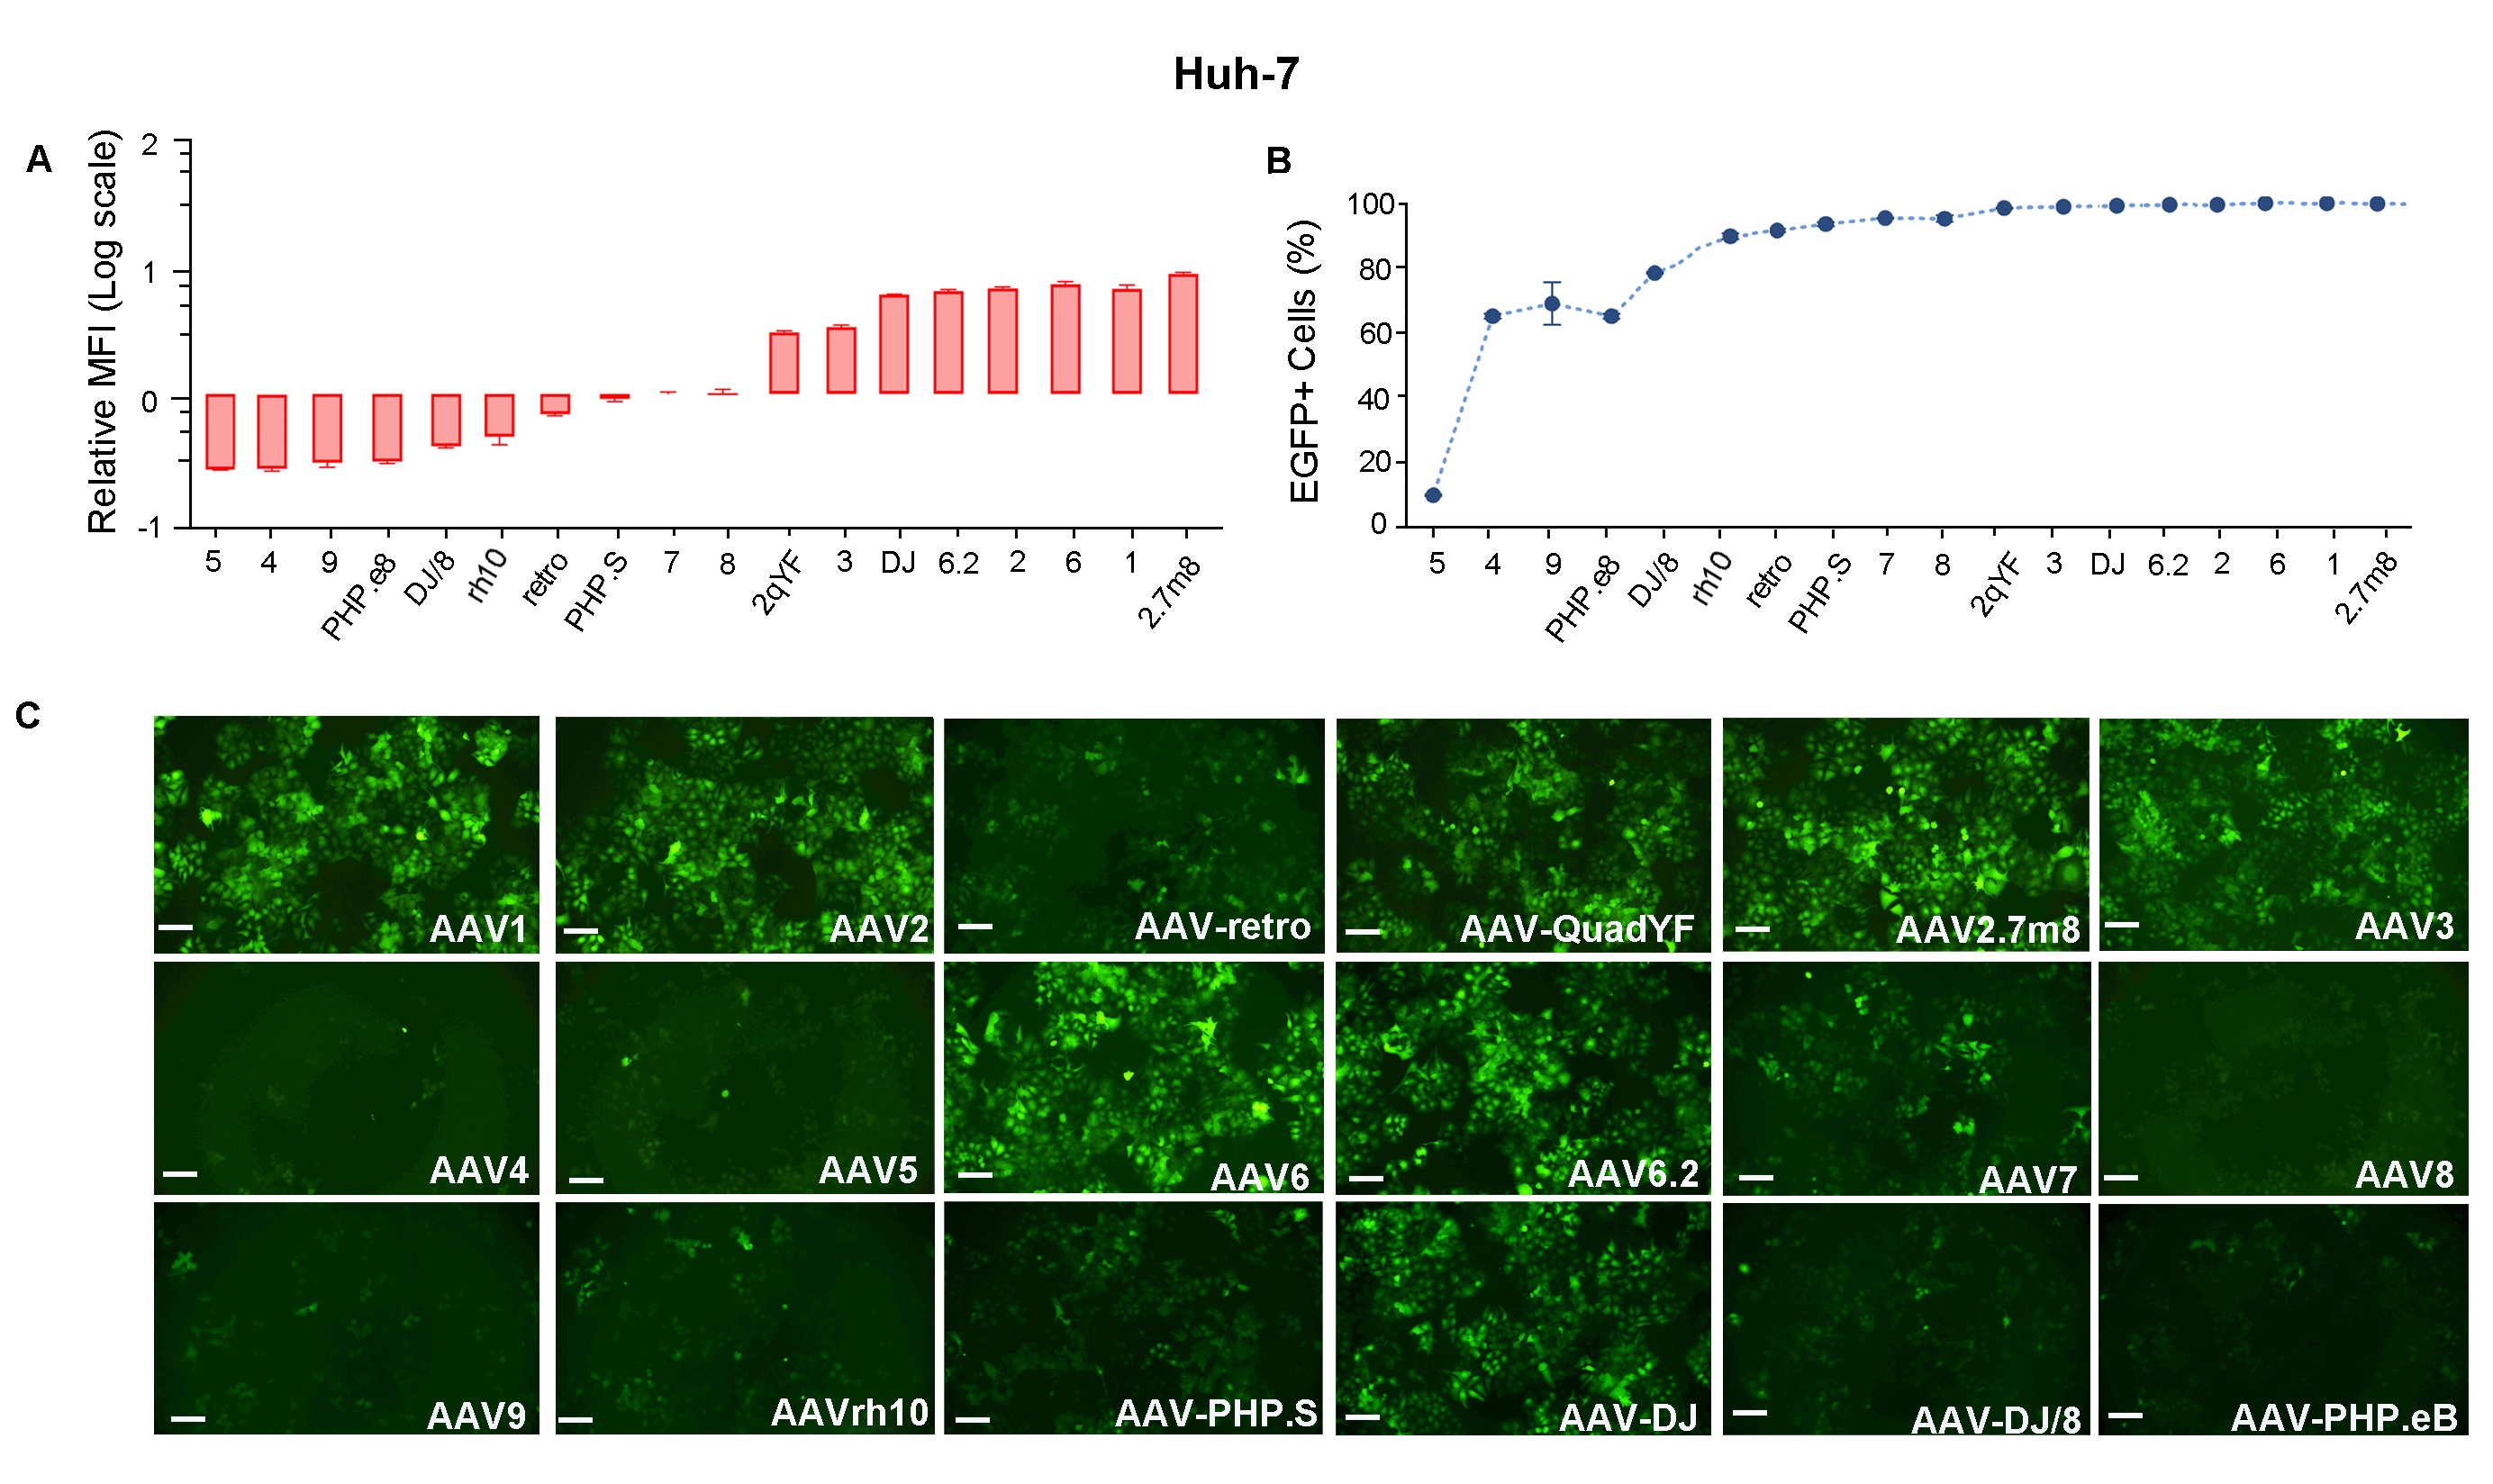 Huh-7 cells were transduced with 18 serotypes of recombinant AAVs and presented strong EGFP fluorescent signal.